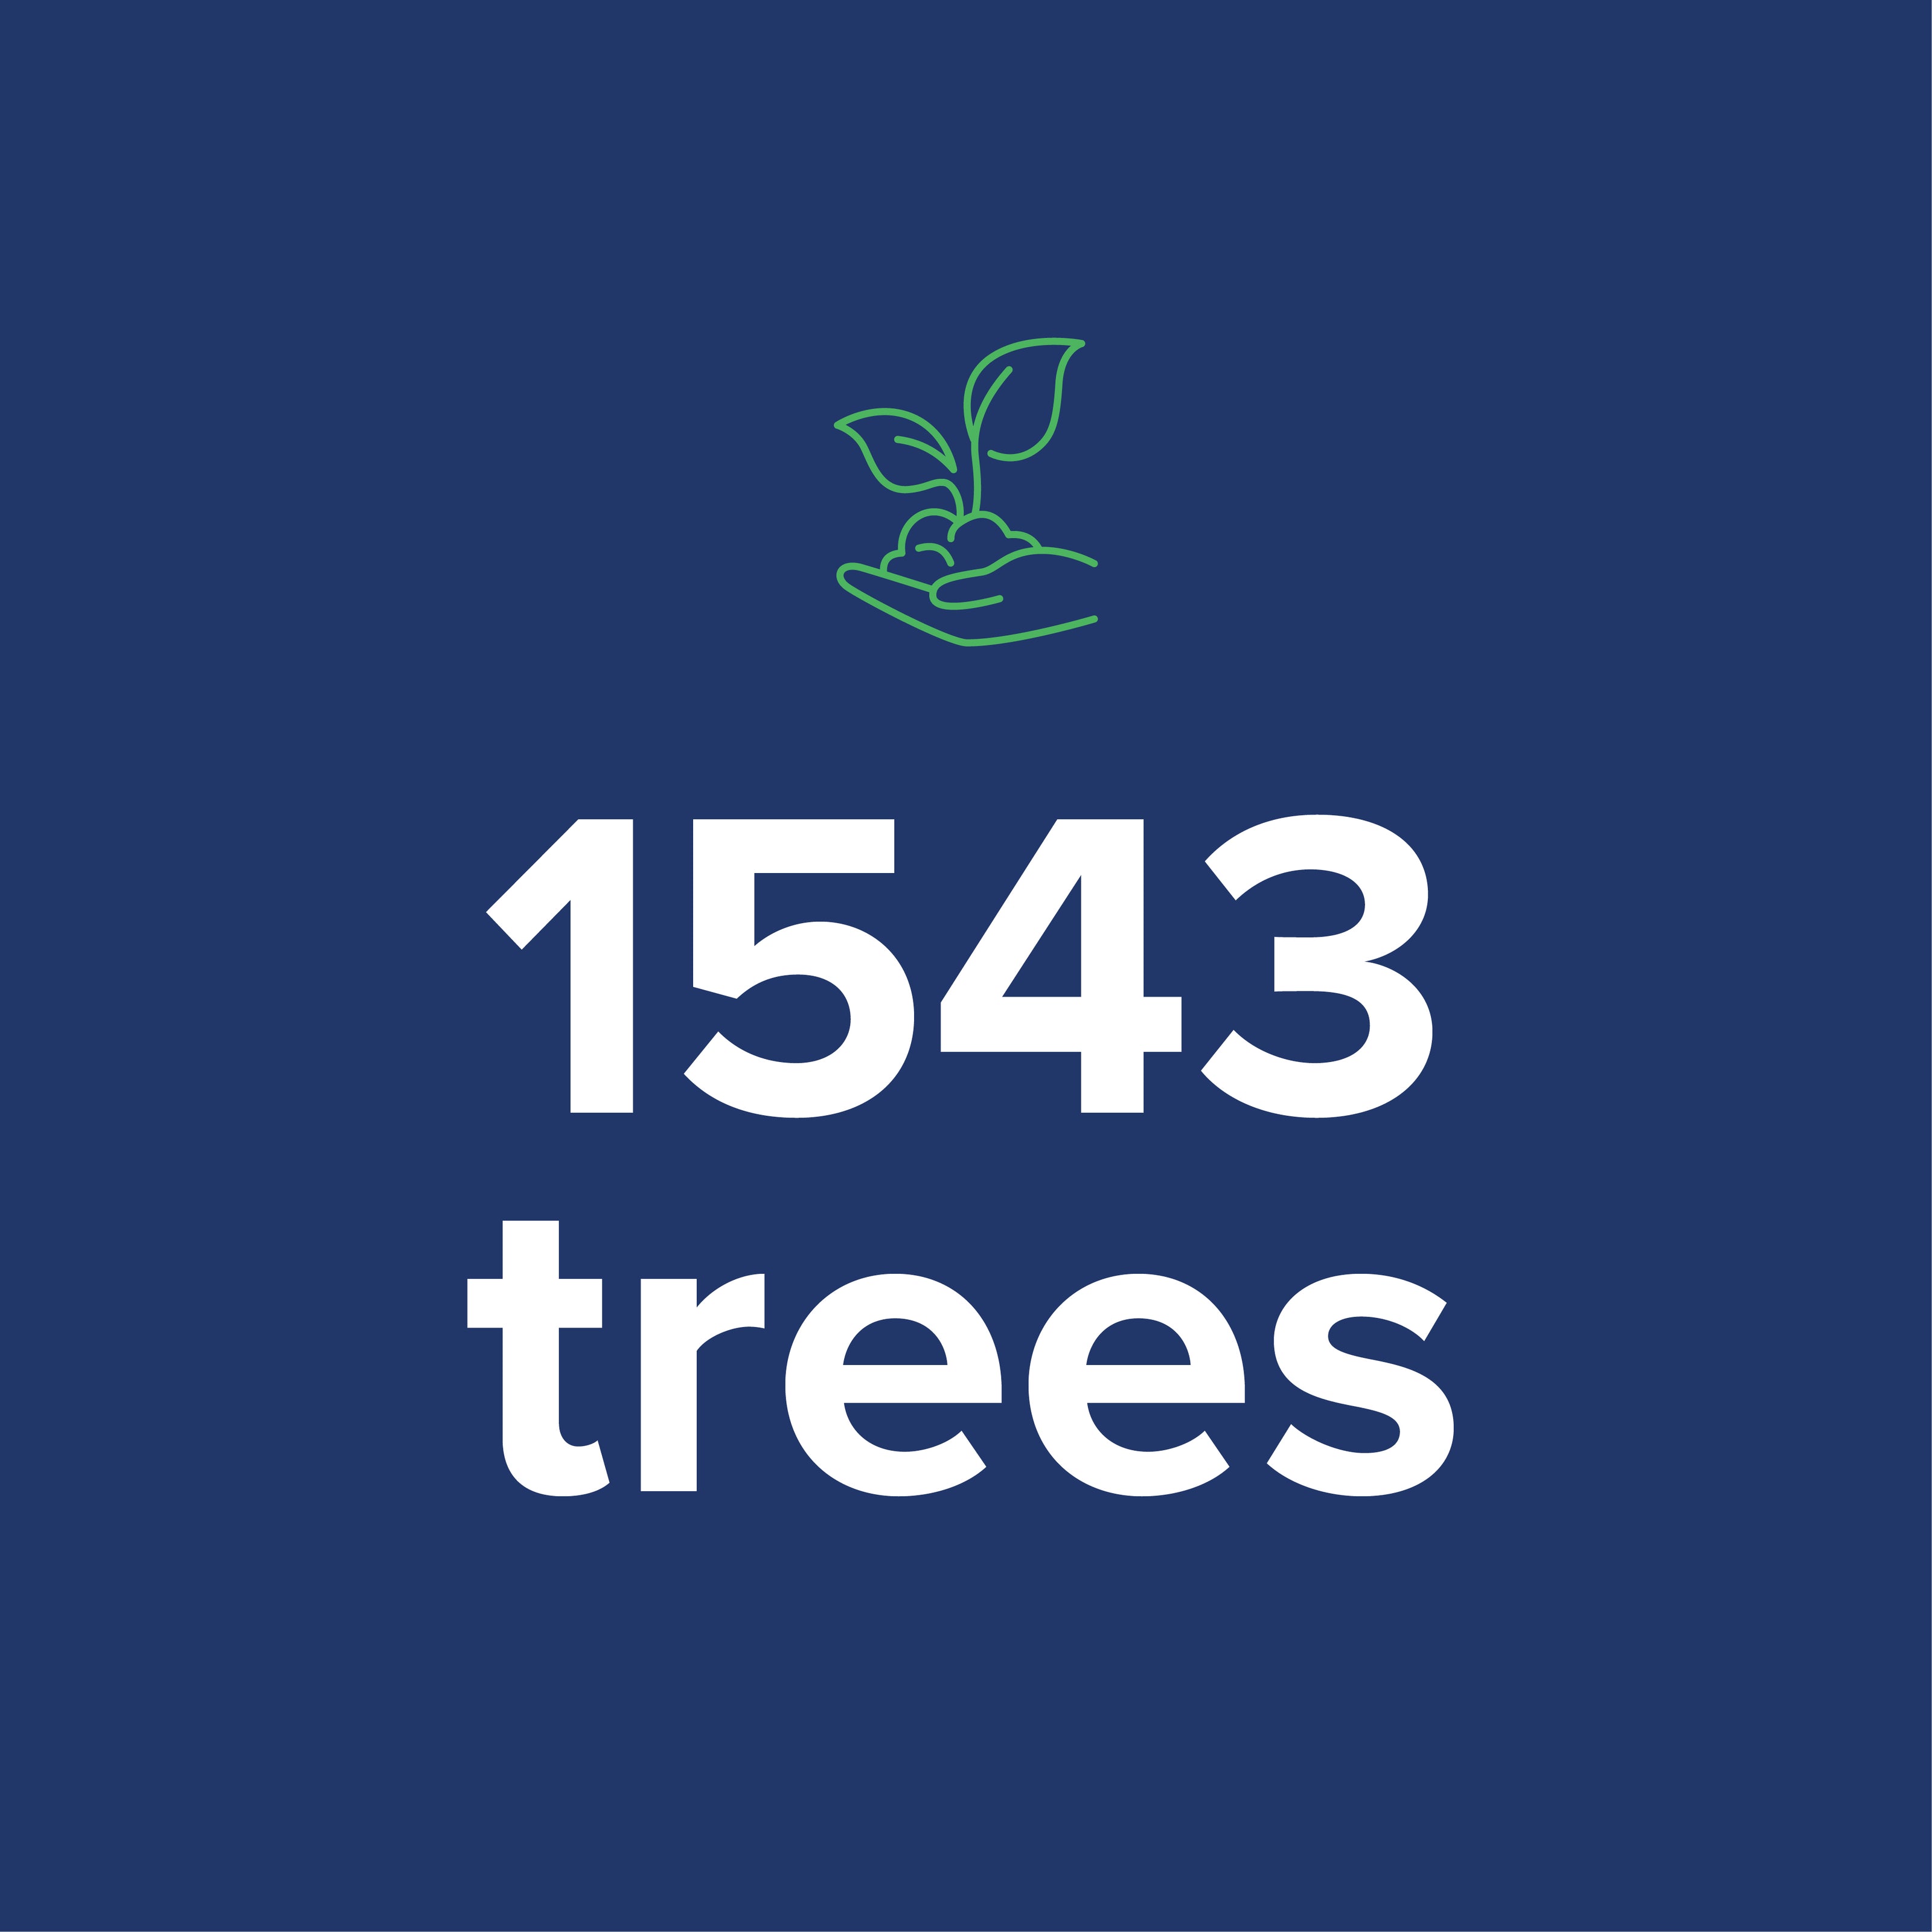 Graphic Image of how many trees we have planted.